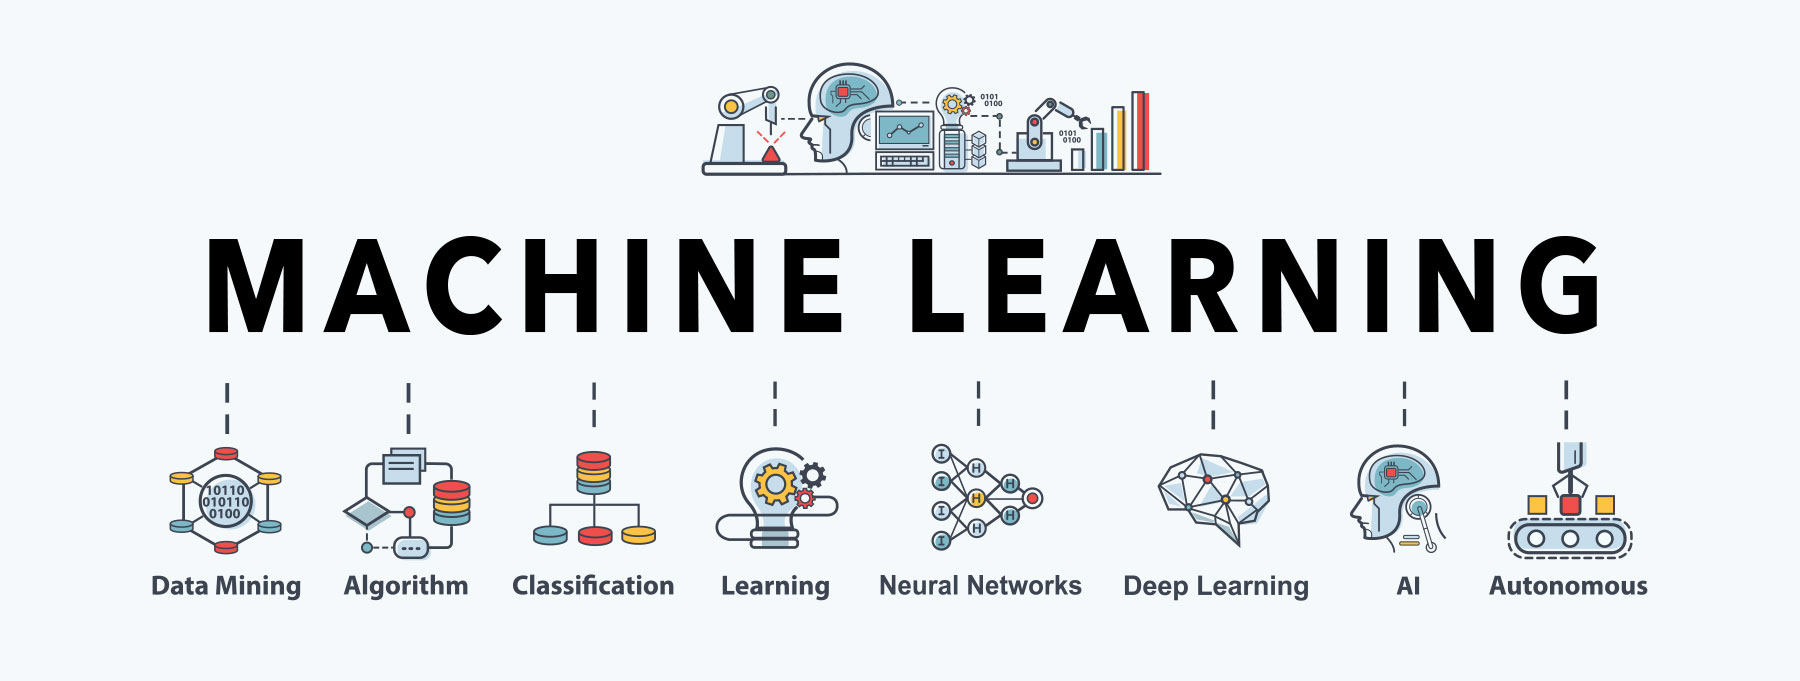 Machine Learning Infographic